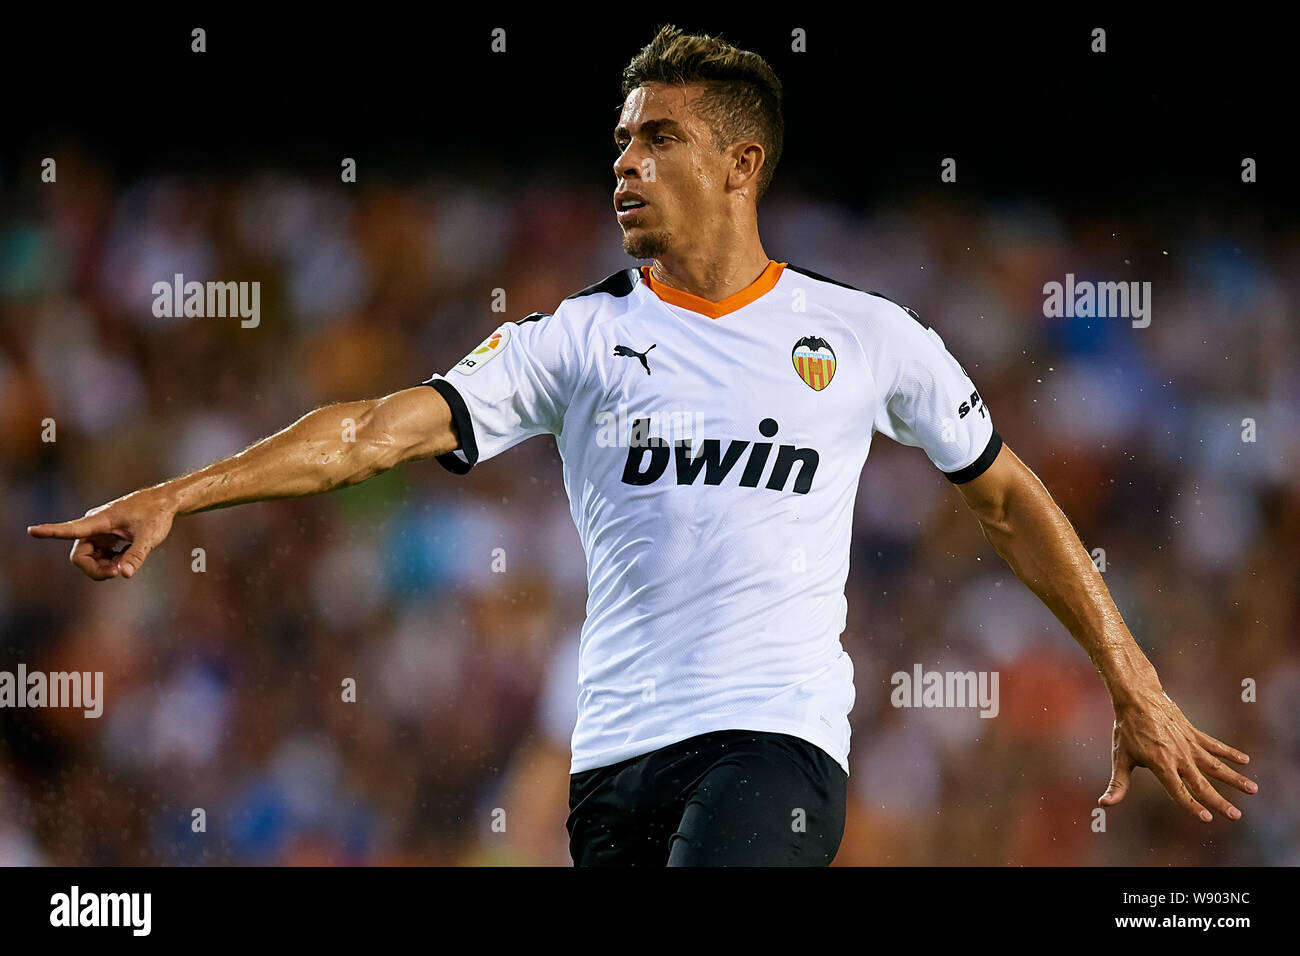 VALENCIA, SPAIN - AUGUST 10: Gabriel Paulista of Valencia CF reacts during the Bwin Trofeo Naranja friendly match between Valencia CF and FC Internazionale at Estadio Mestalla on August 10, 2019 in Valencia, Spain. (Photo by Get Ready Images/MB Media) Stock Photo